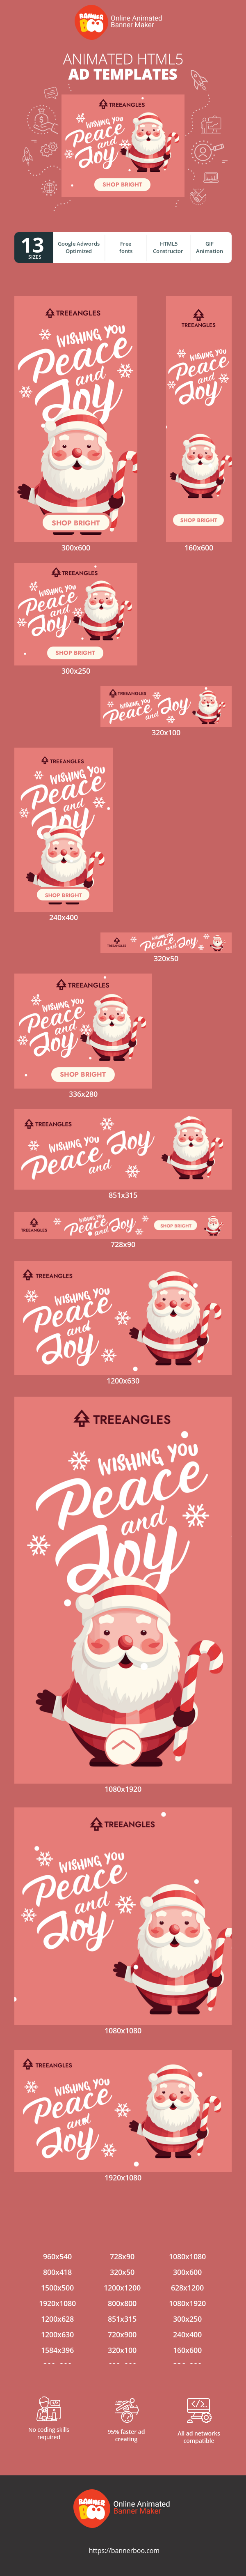 Banner ad template — Wishing You Peace And Joy — Christmas